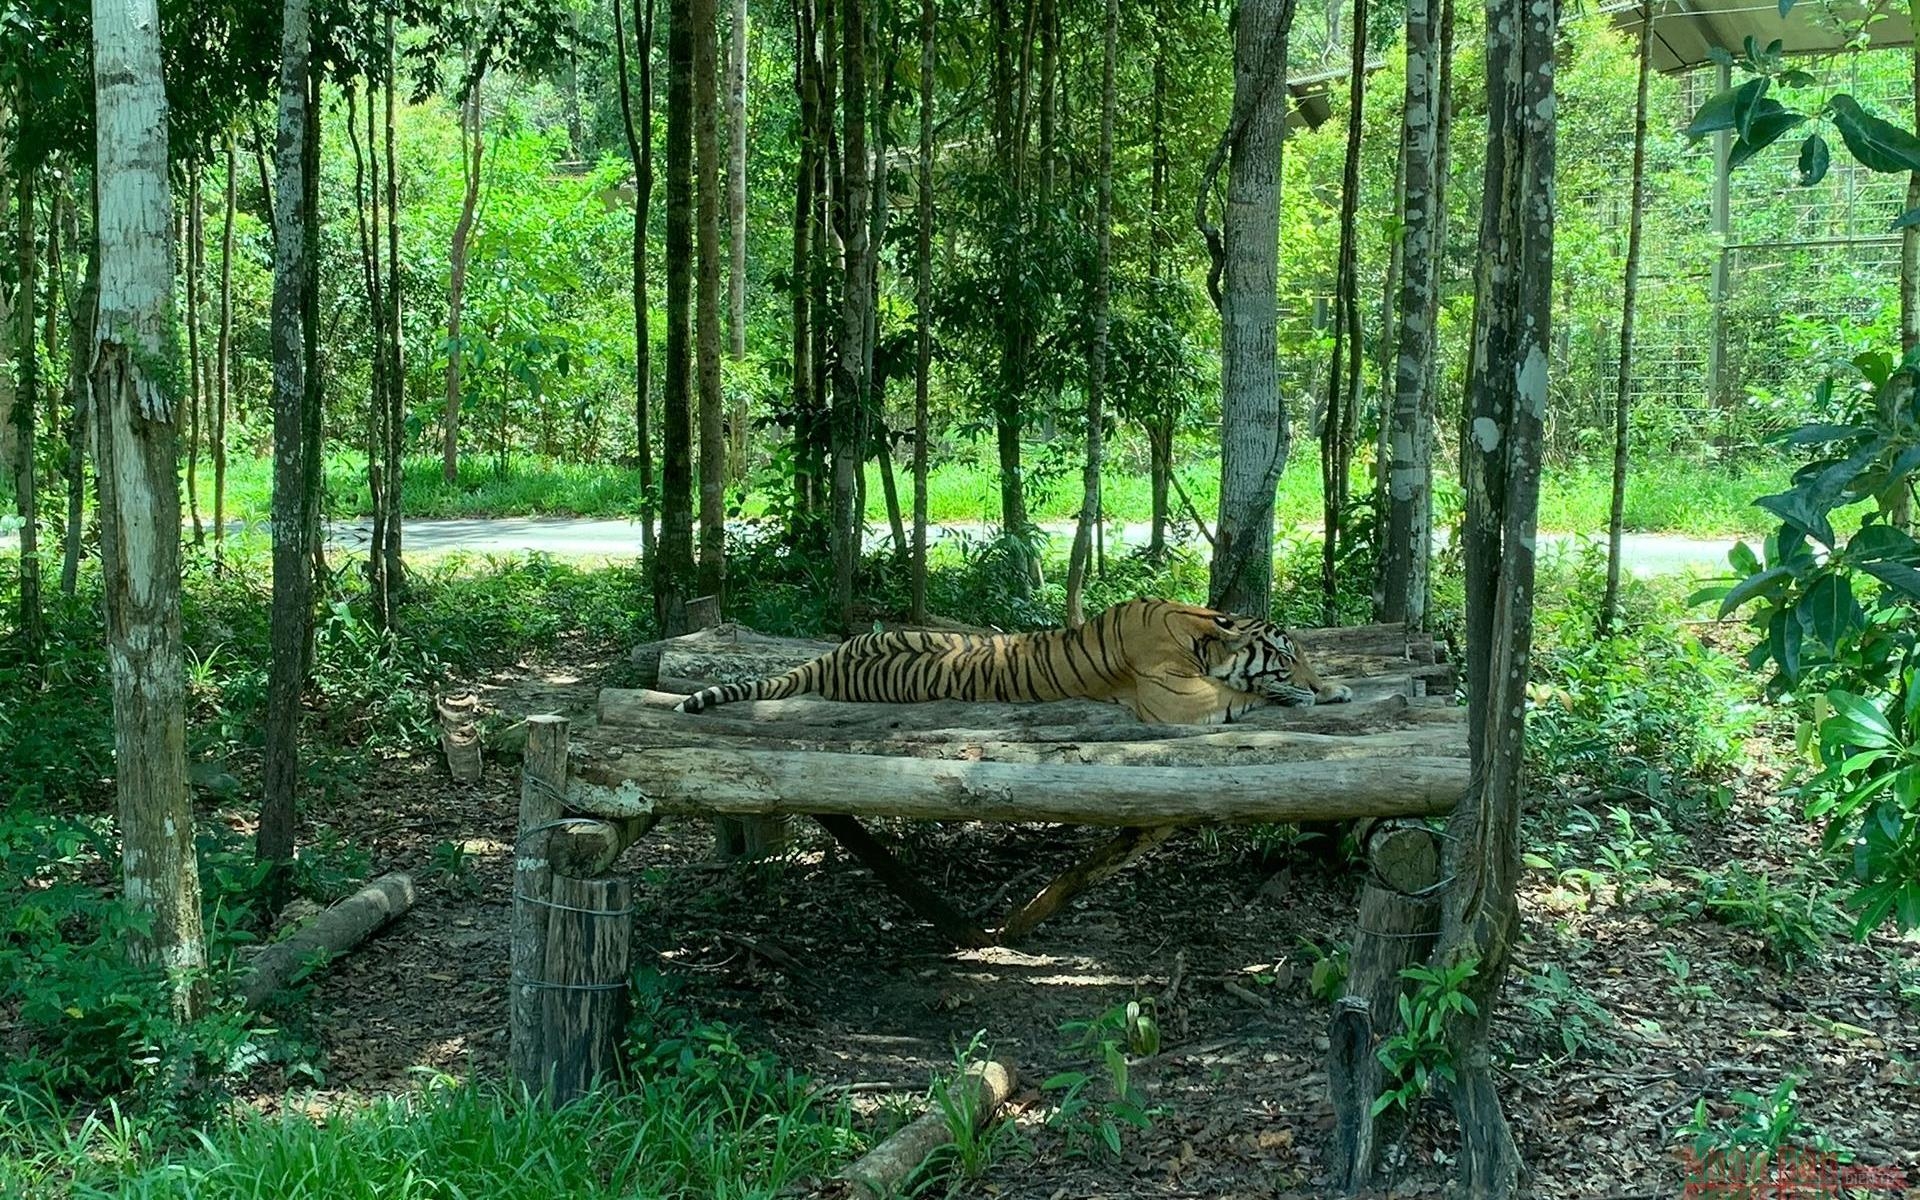 A tiger lying under the shade of trees 